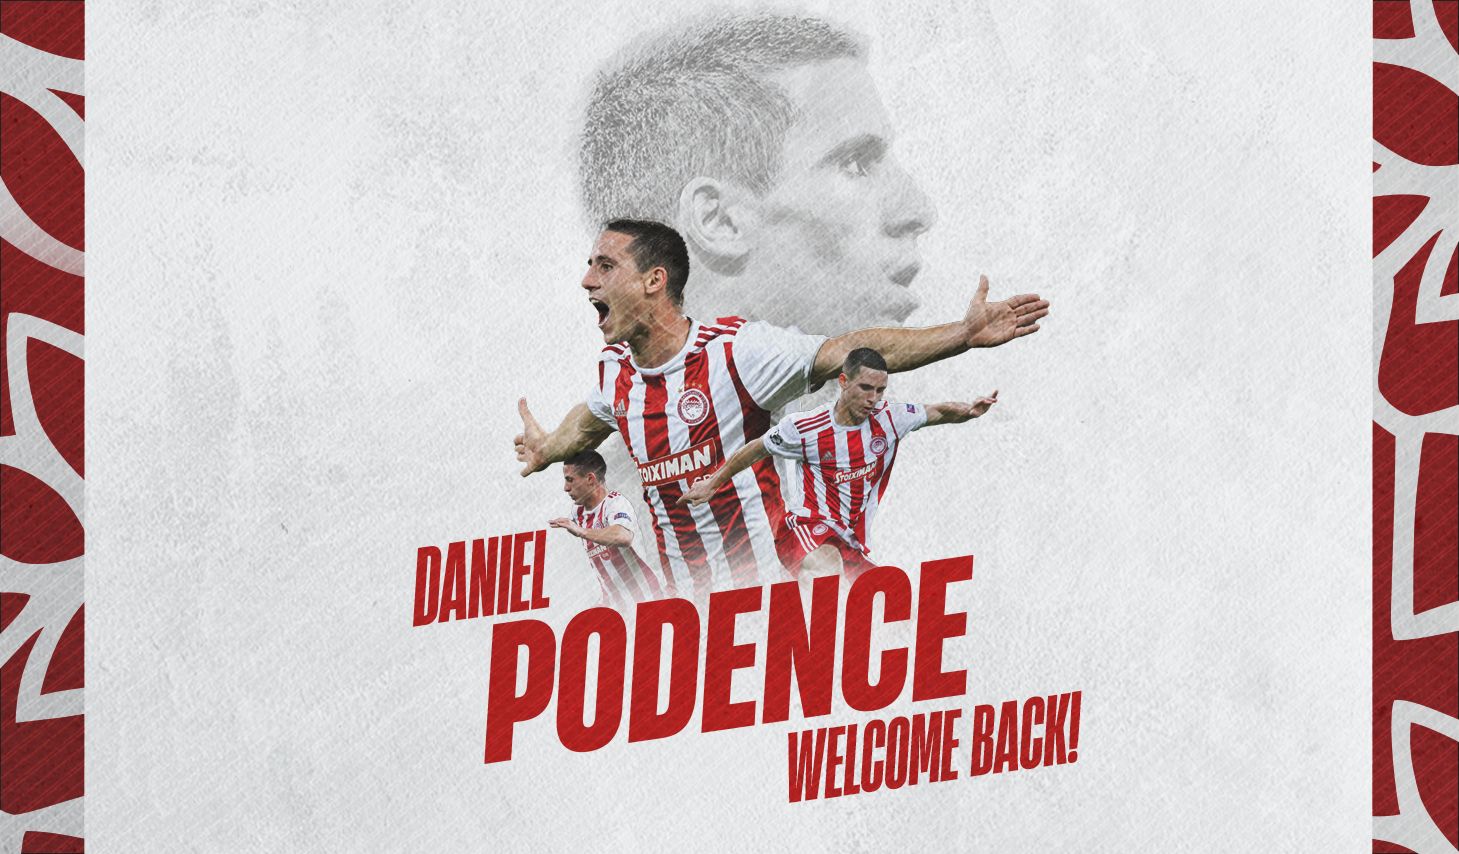 Podence is back in Olympiacos!